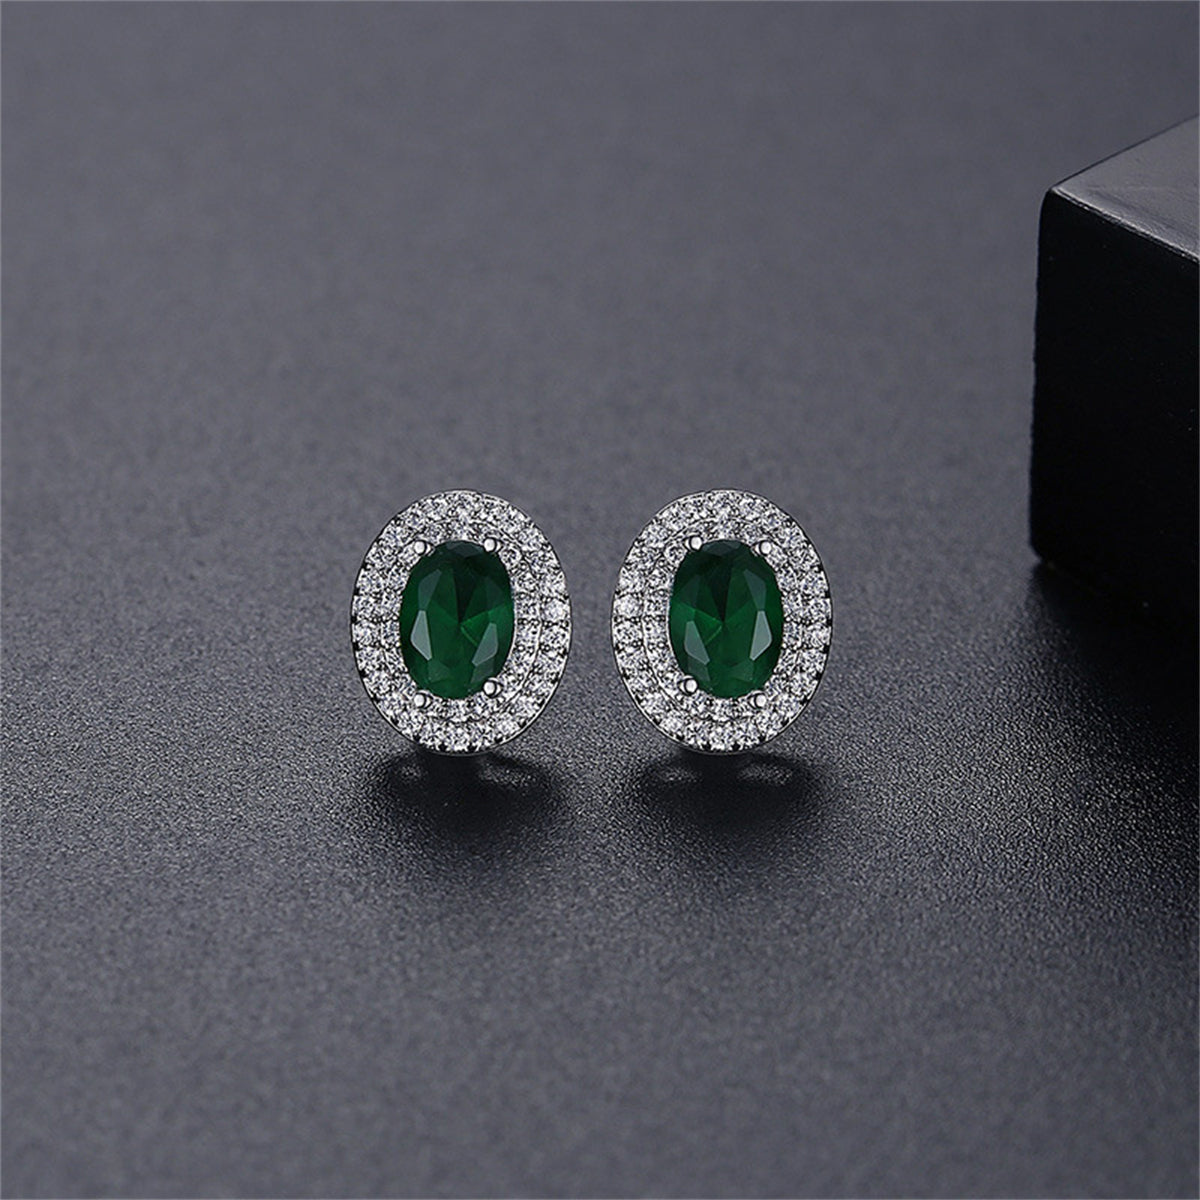 Green Crystal & Cubic Zirconia Silver-Plated Hola Oval Stud Earrings